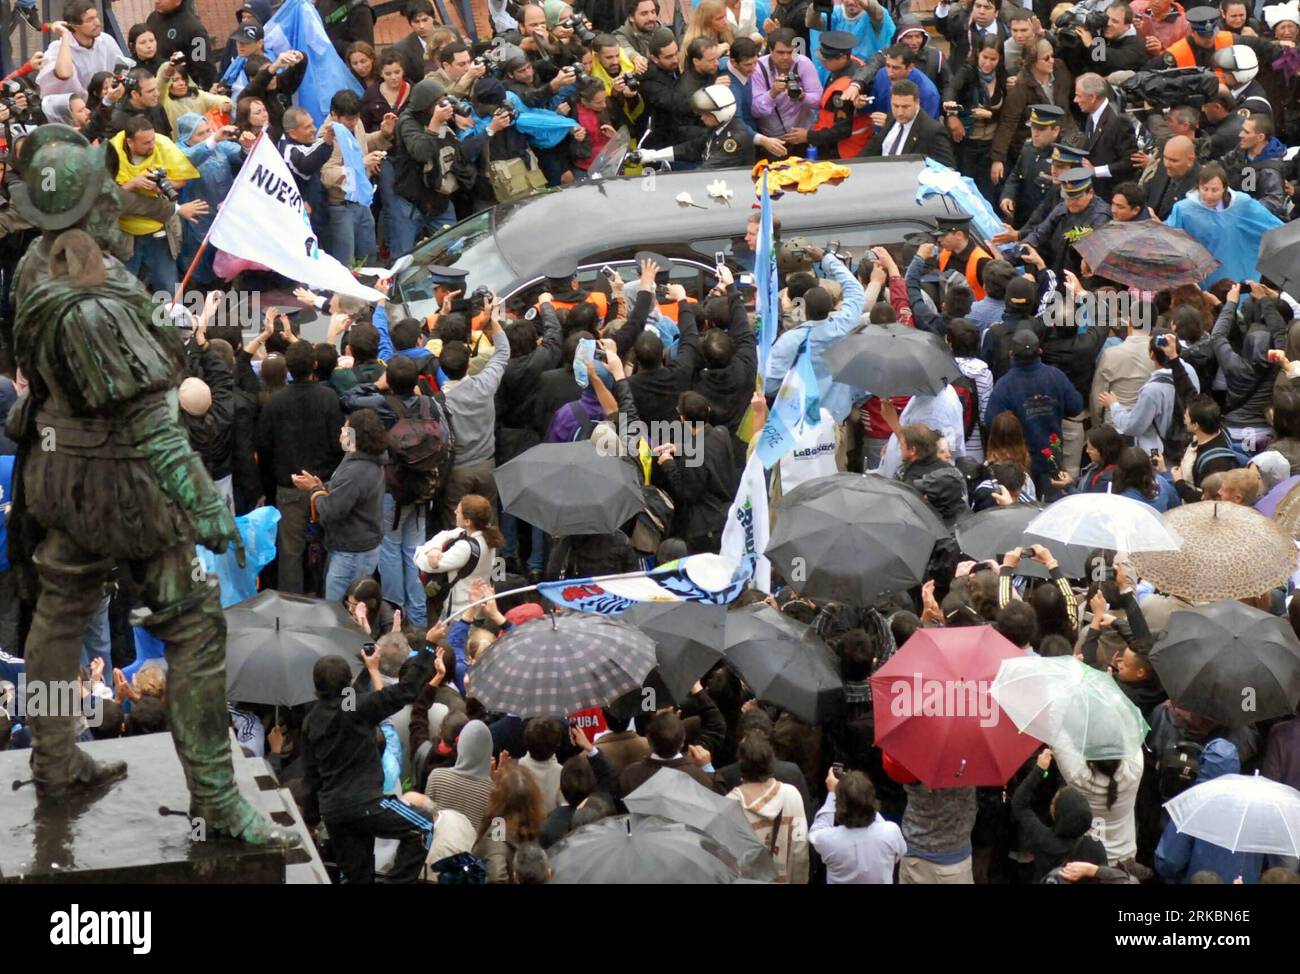 Bildnummer: 54585407  Datum: 29.10.2010  Copyright: imago/Xinhua (101029) --  BUENOS AIRES, Oct. 29, 2010 (Xinhua) -- pay respect to the hearse which carries the remains of former Argentine President Nestor Kirchner from the Casa Rosada Presidential Palace to a local airport for a flight to his home El Calafate, Province of Santa Cruz, where he will be buried in his family cemetery, Oct. 29, 2010. (Xinhua/Leonardo Zavattaro/Telam) ARGENTINA-BUENOS AIRES-KIRCHNER-FUNERAL PUBLICATIONxNOTxINxCHN People Politik Beerdigung Trauer Kirchner premiumd kbdig xcb 2010 quer    Bildnummer 54585407 Date 29 Stock Photo